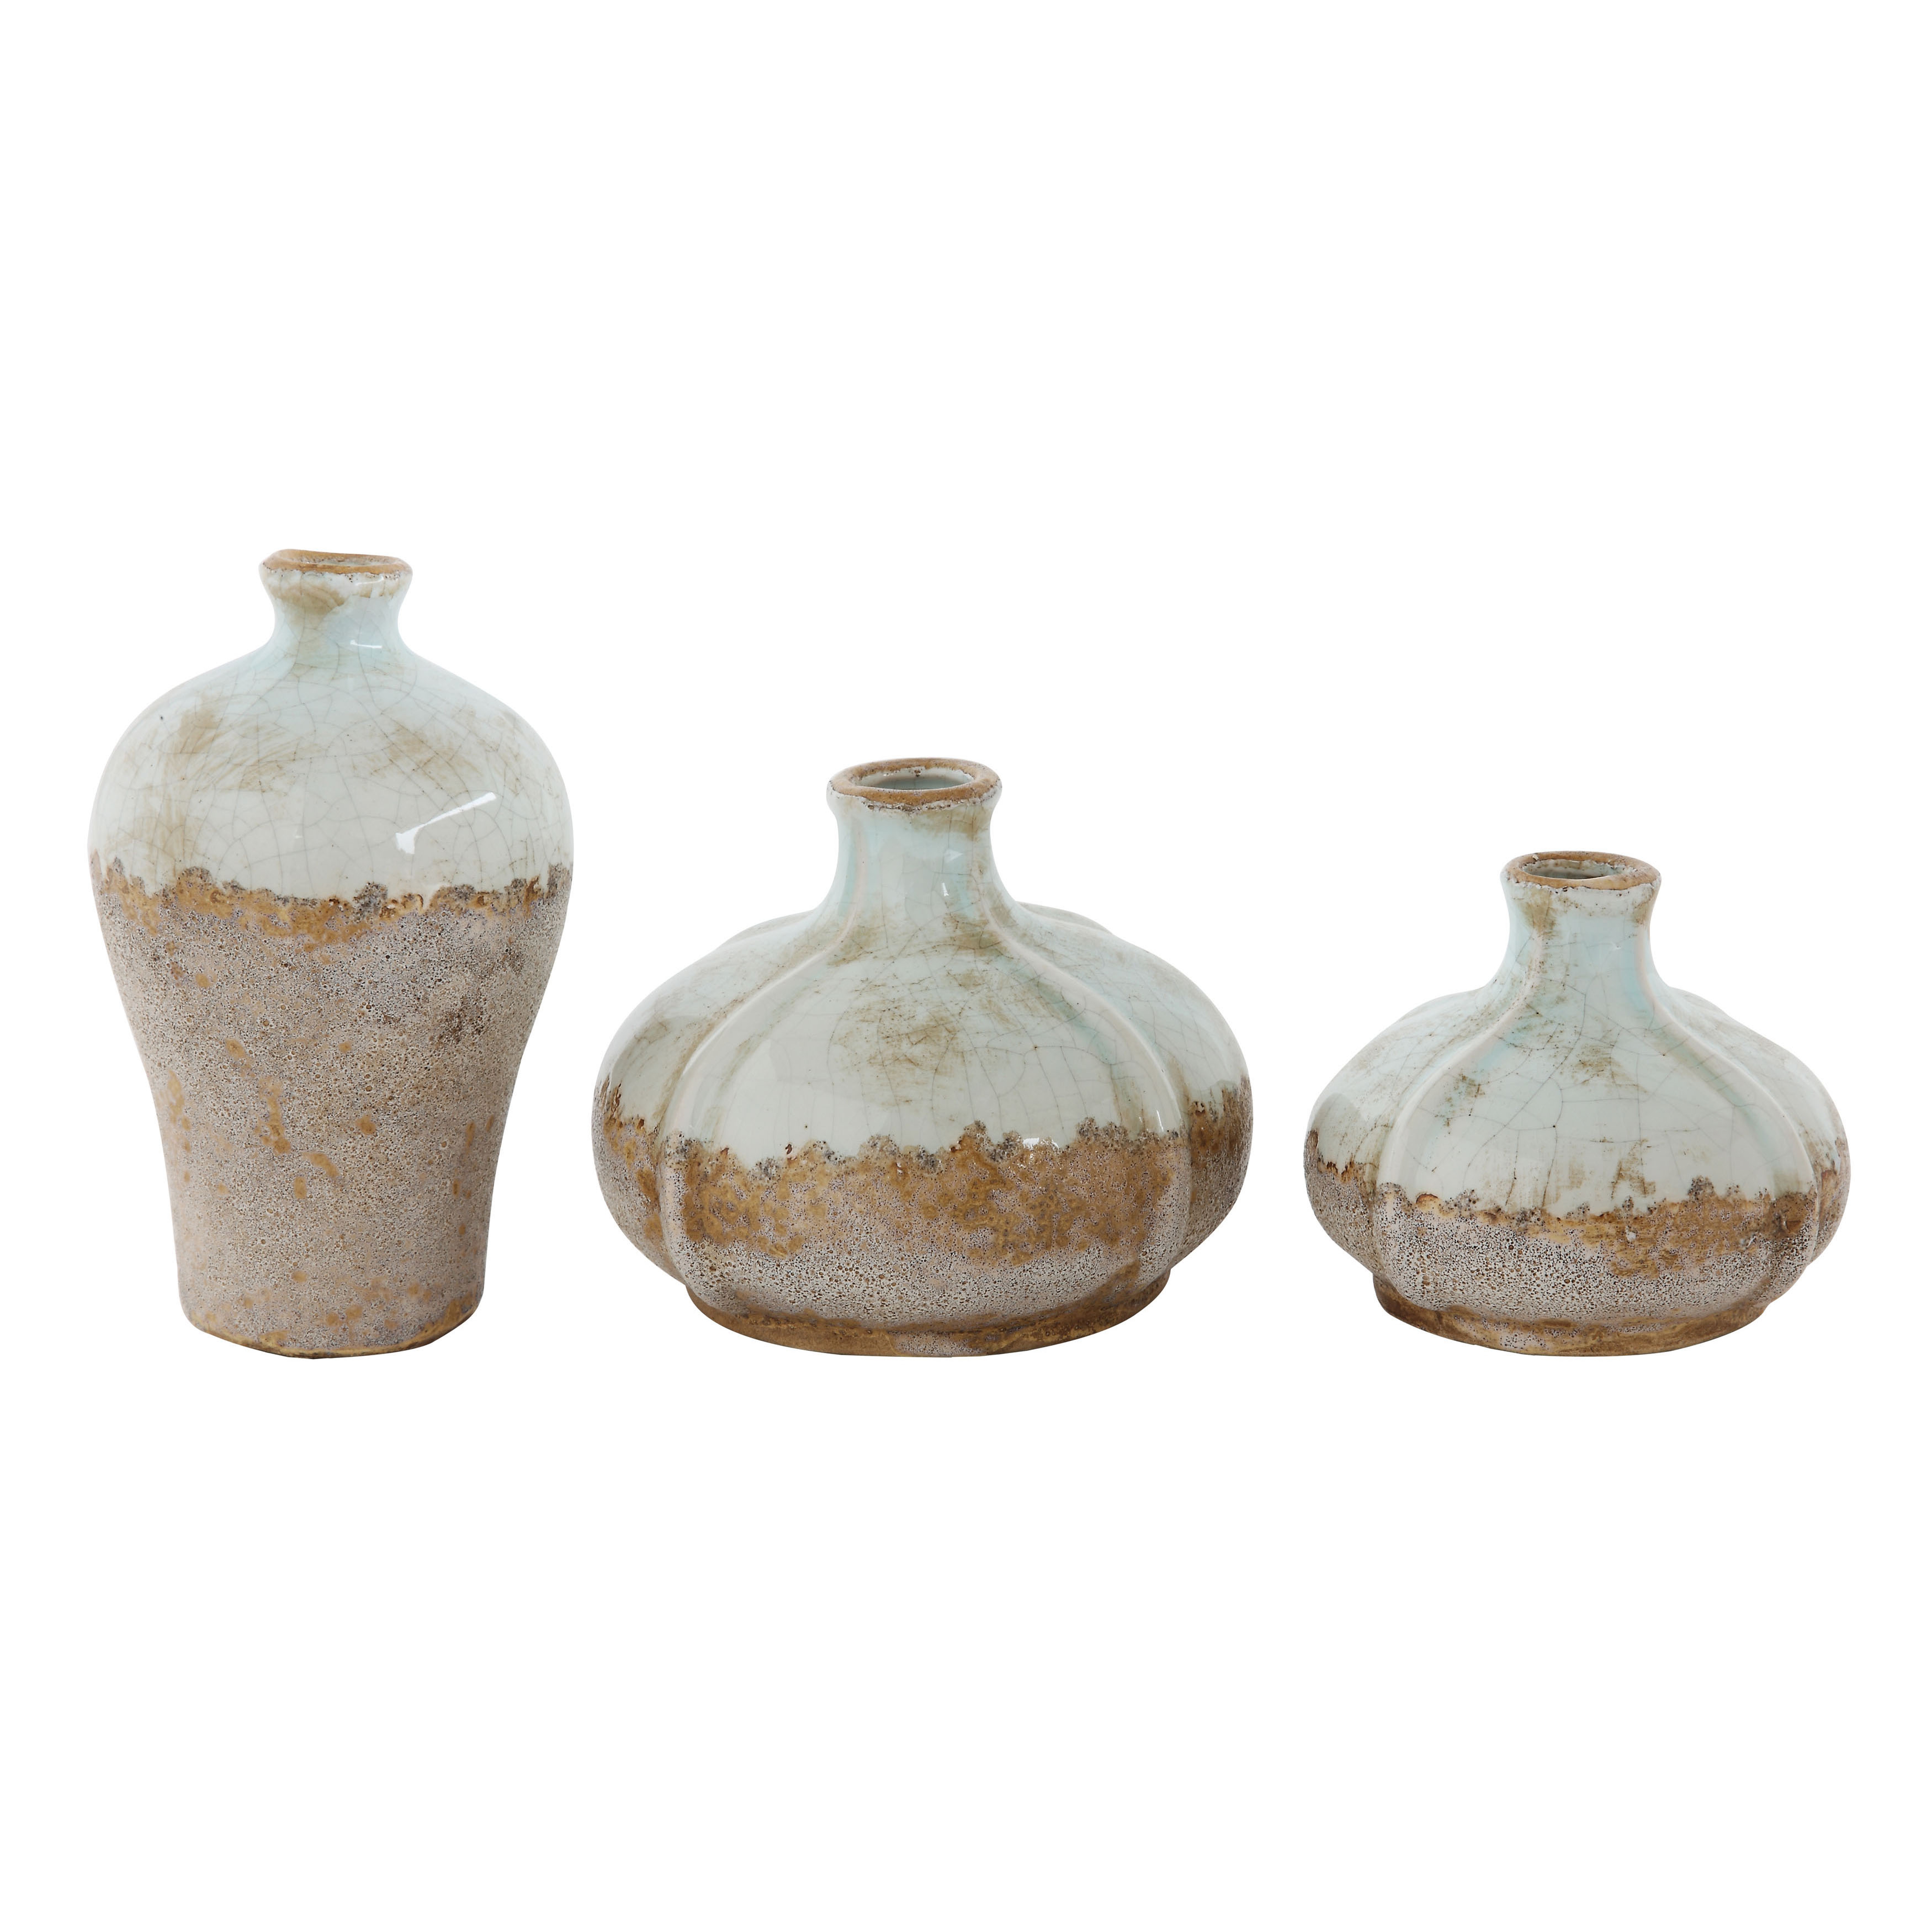 Various Decorative Terra-cotta Vases with Distressed Finish, Brown and White, Set of 3 - Nomad Home